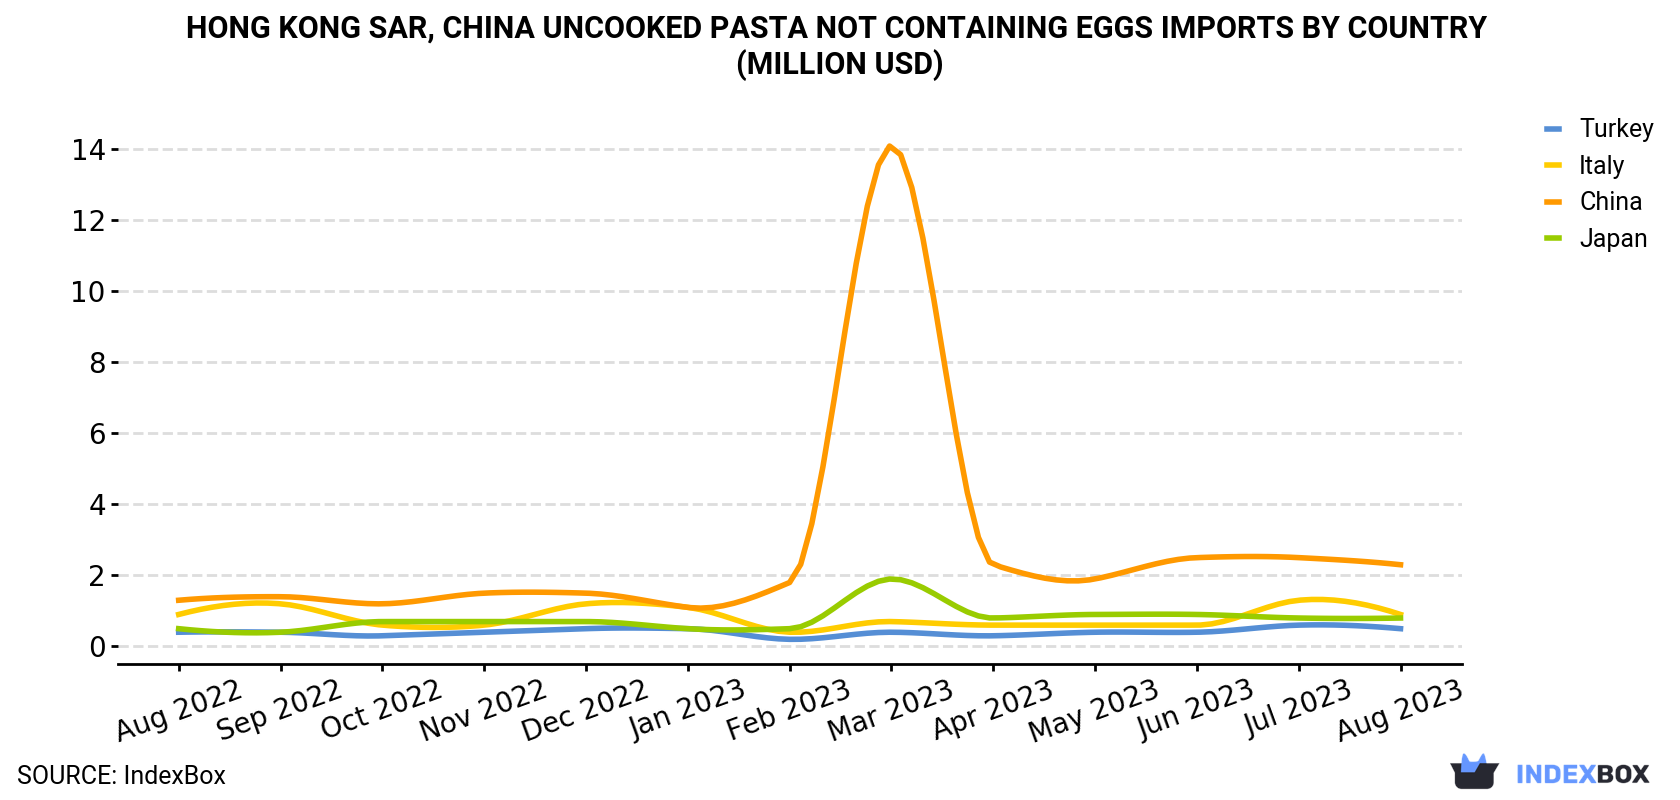 Hong Kong Uncooked Pasta not Containing Eggs Imports By Country (Million USD)